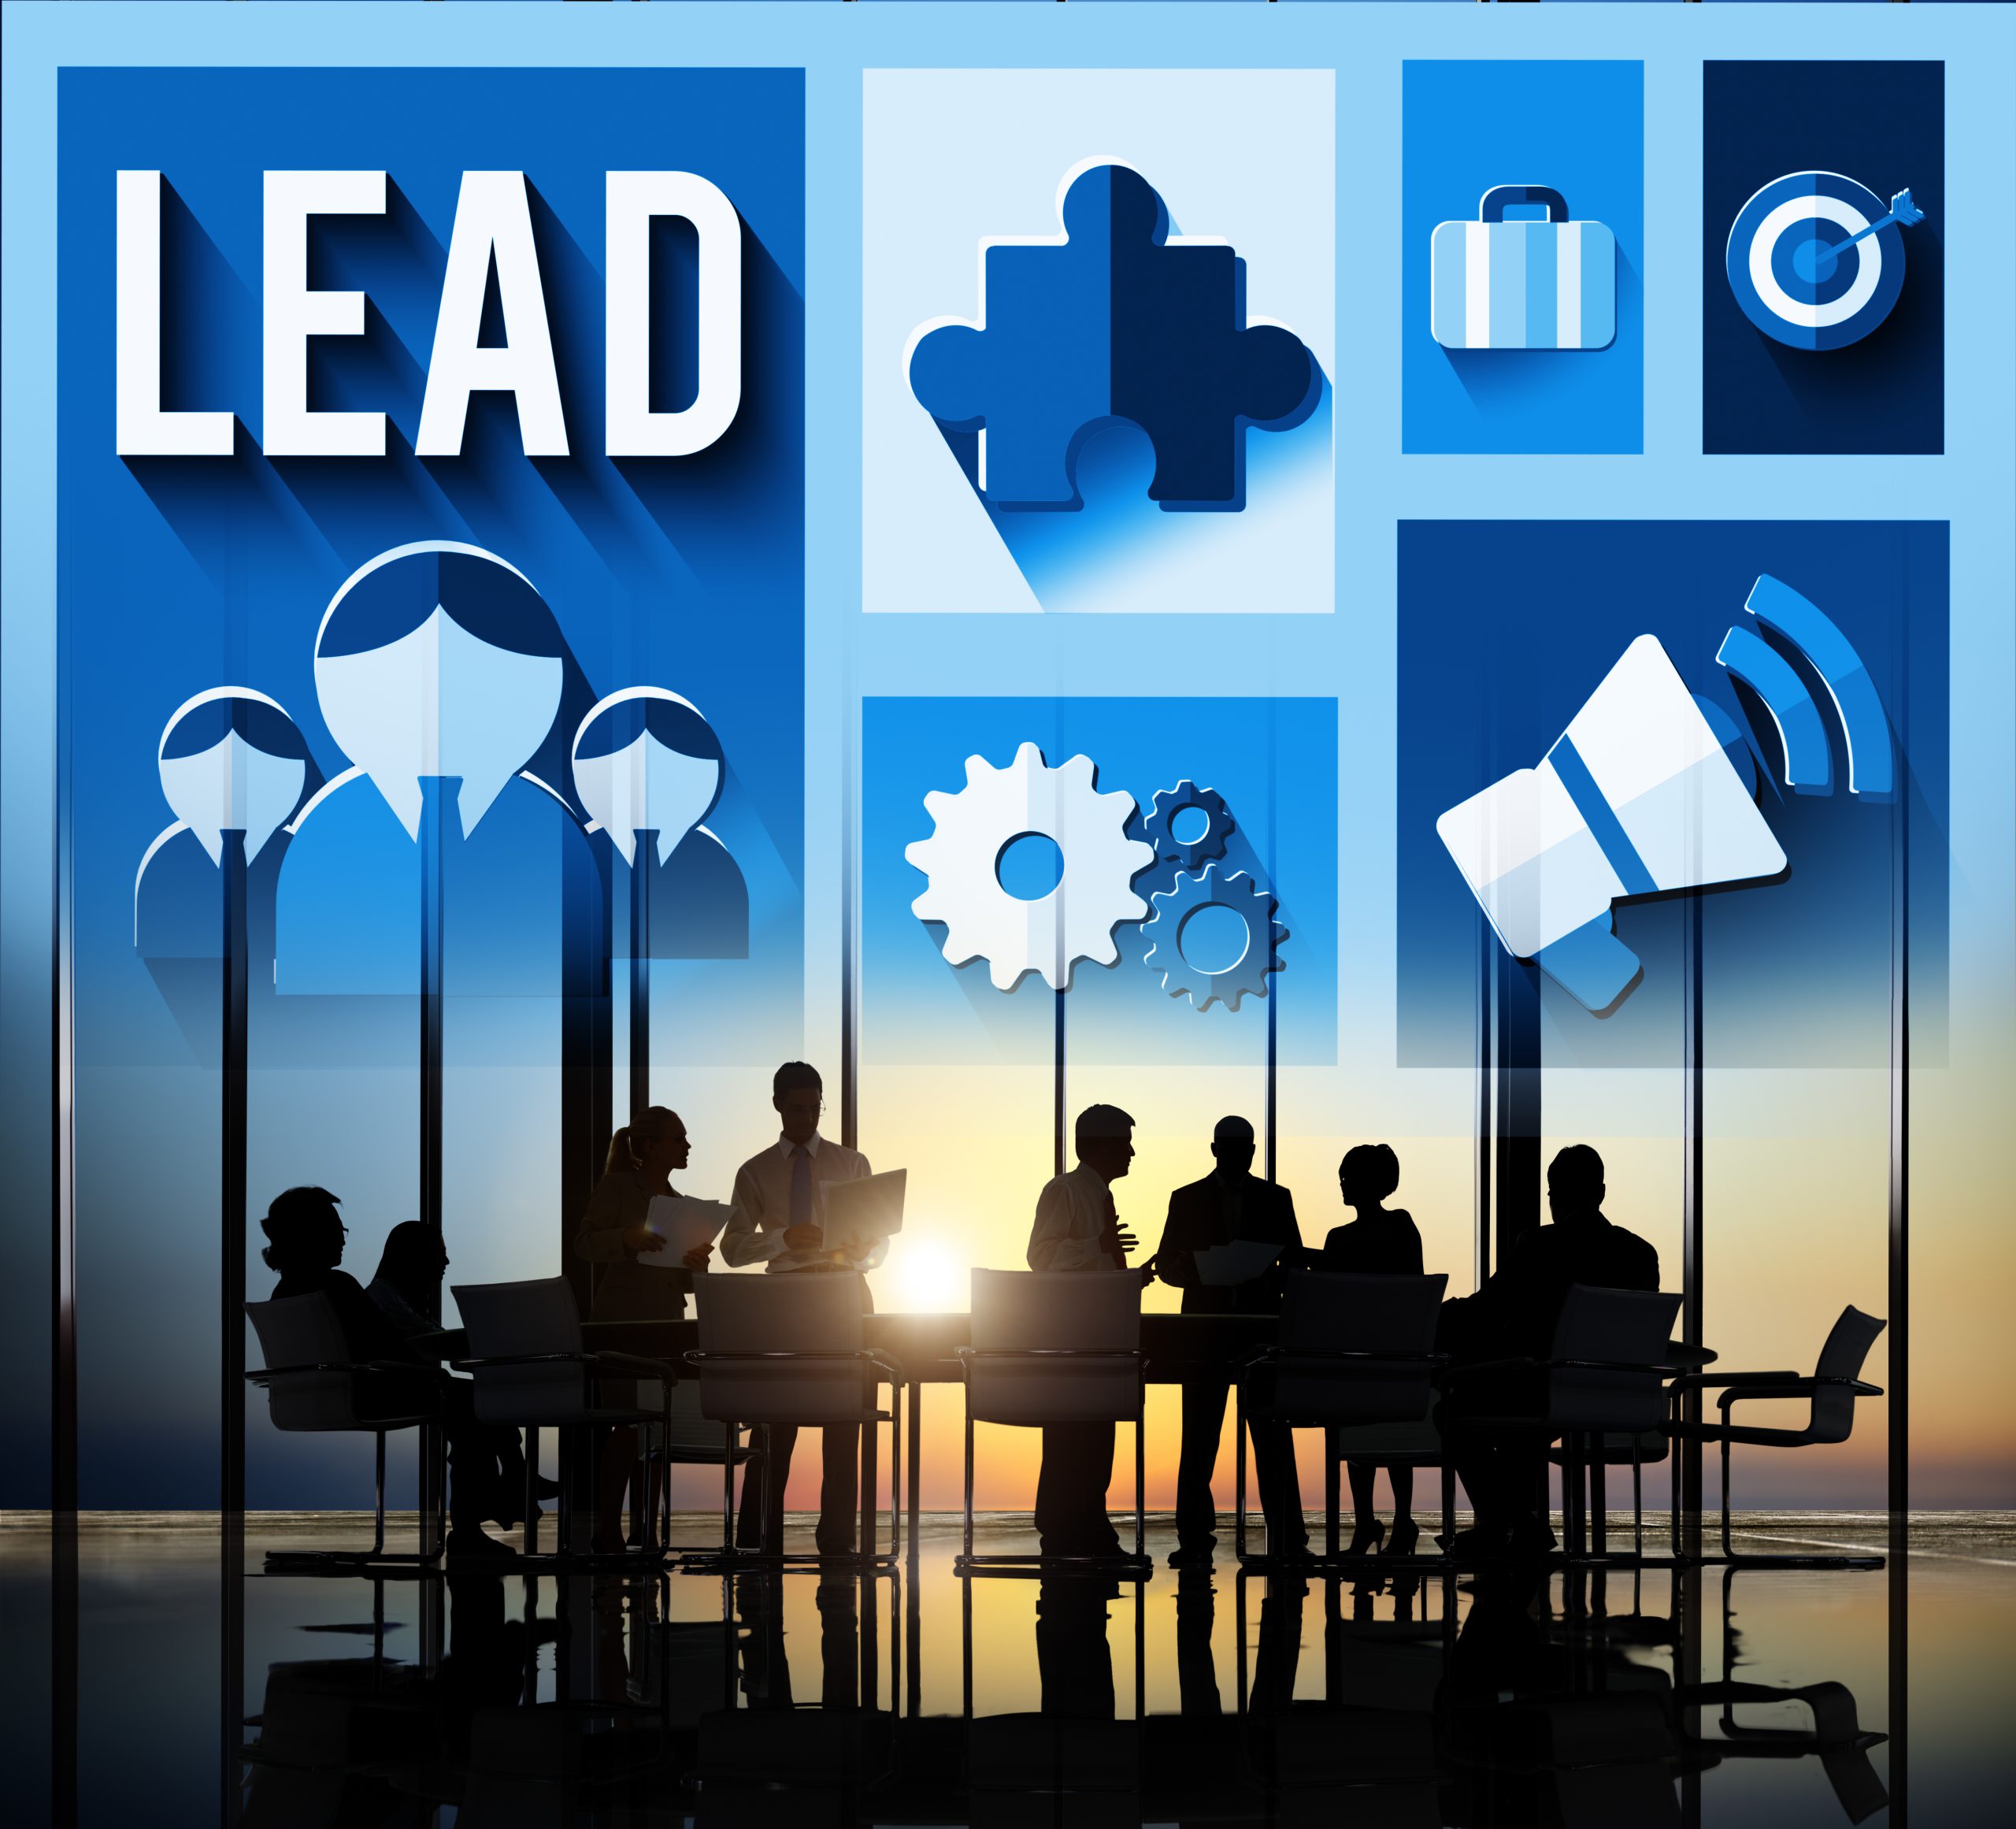 lead leadership management mentor boss concept scaled